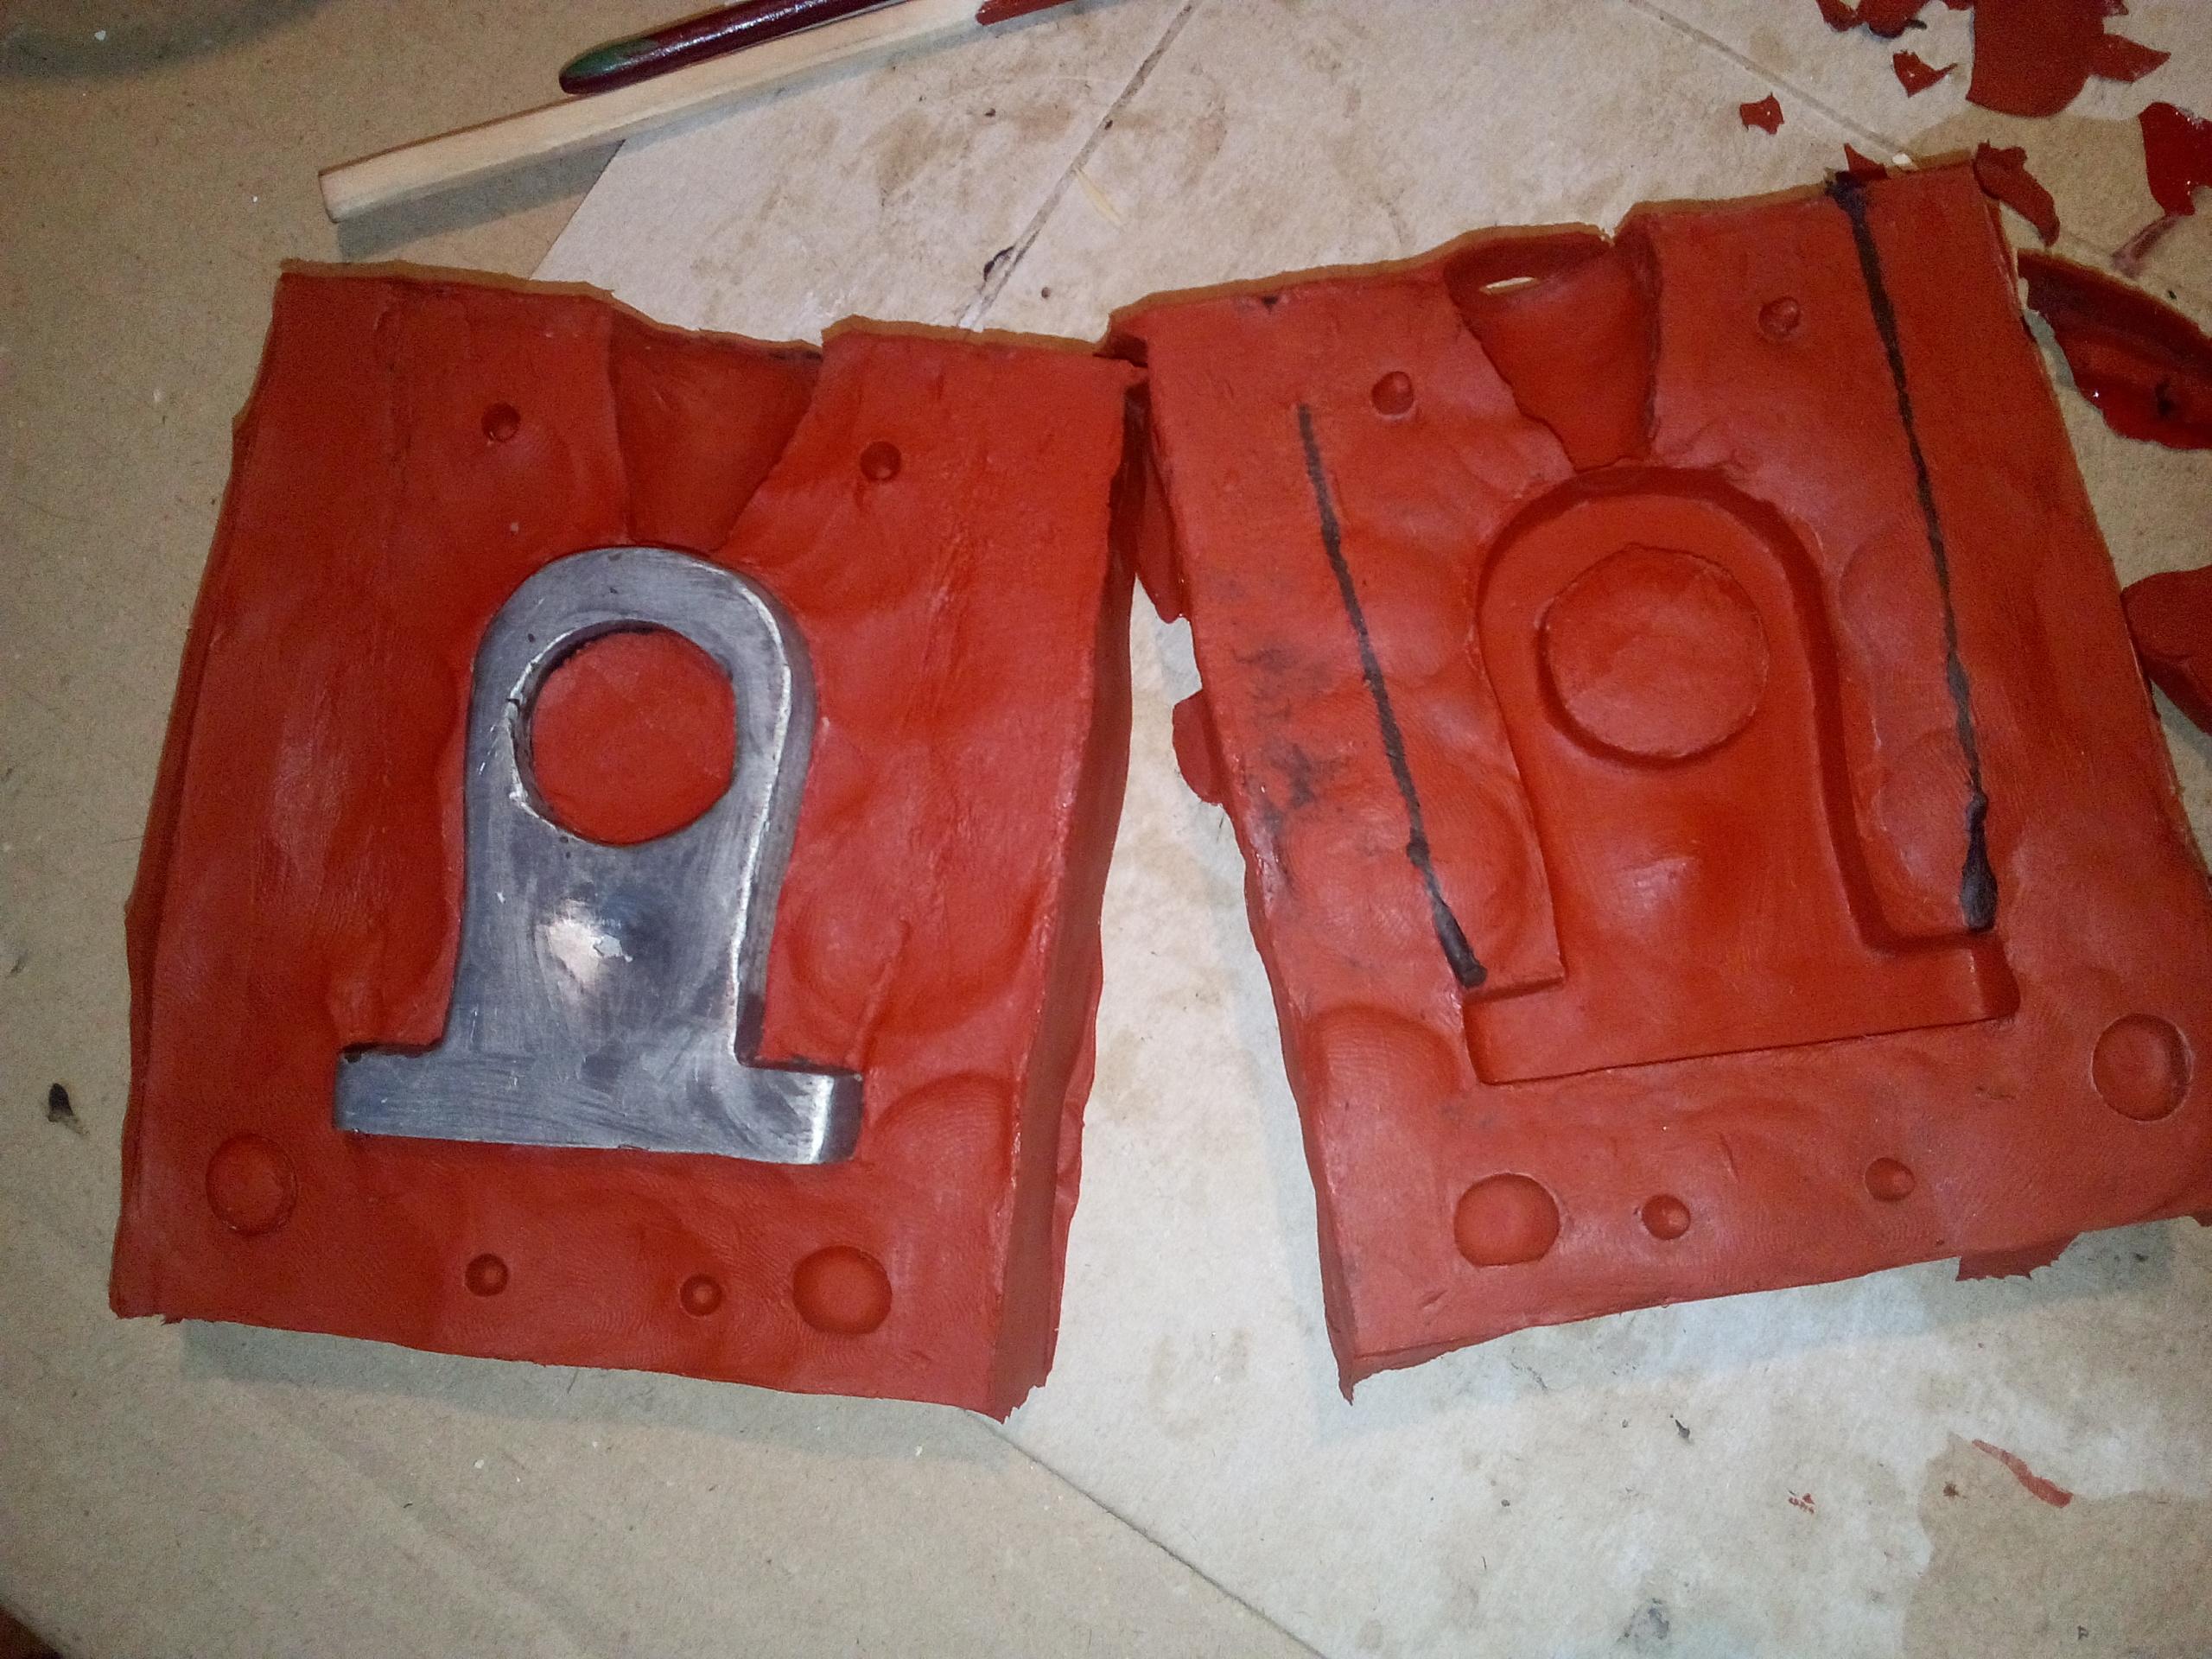 The second part of the silicon mold is almost ready.